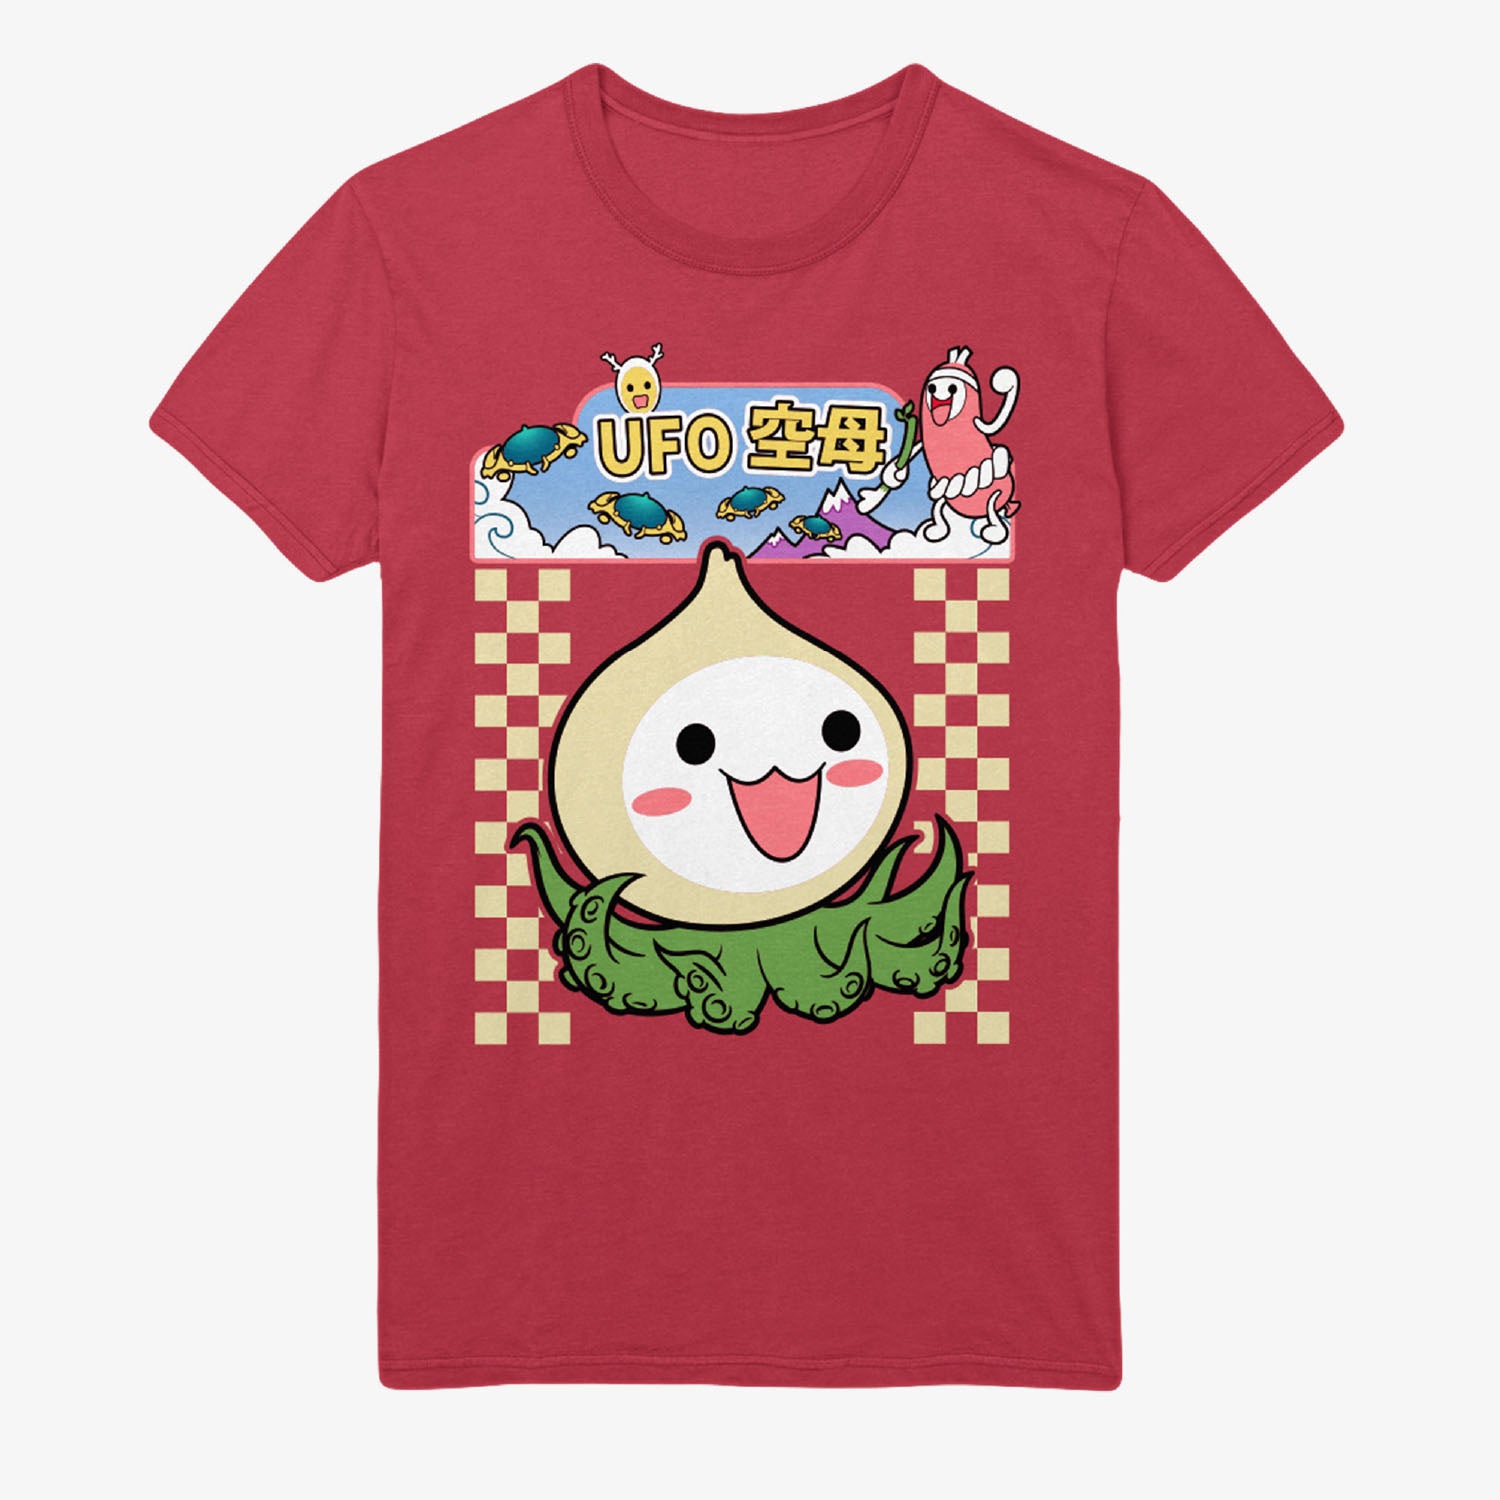 Overwatch Pachmari Red UFO Catcher T-Shirt - Front View